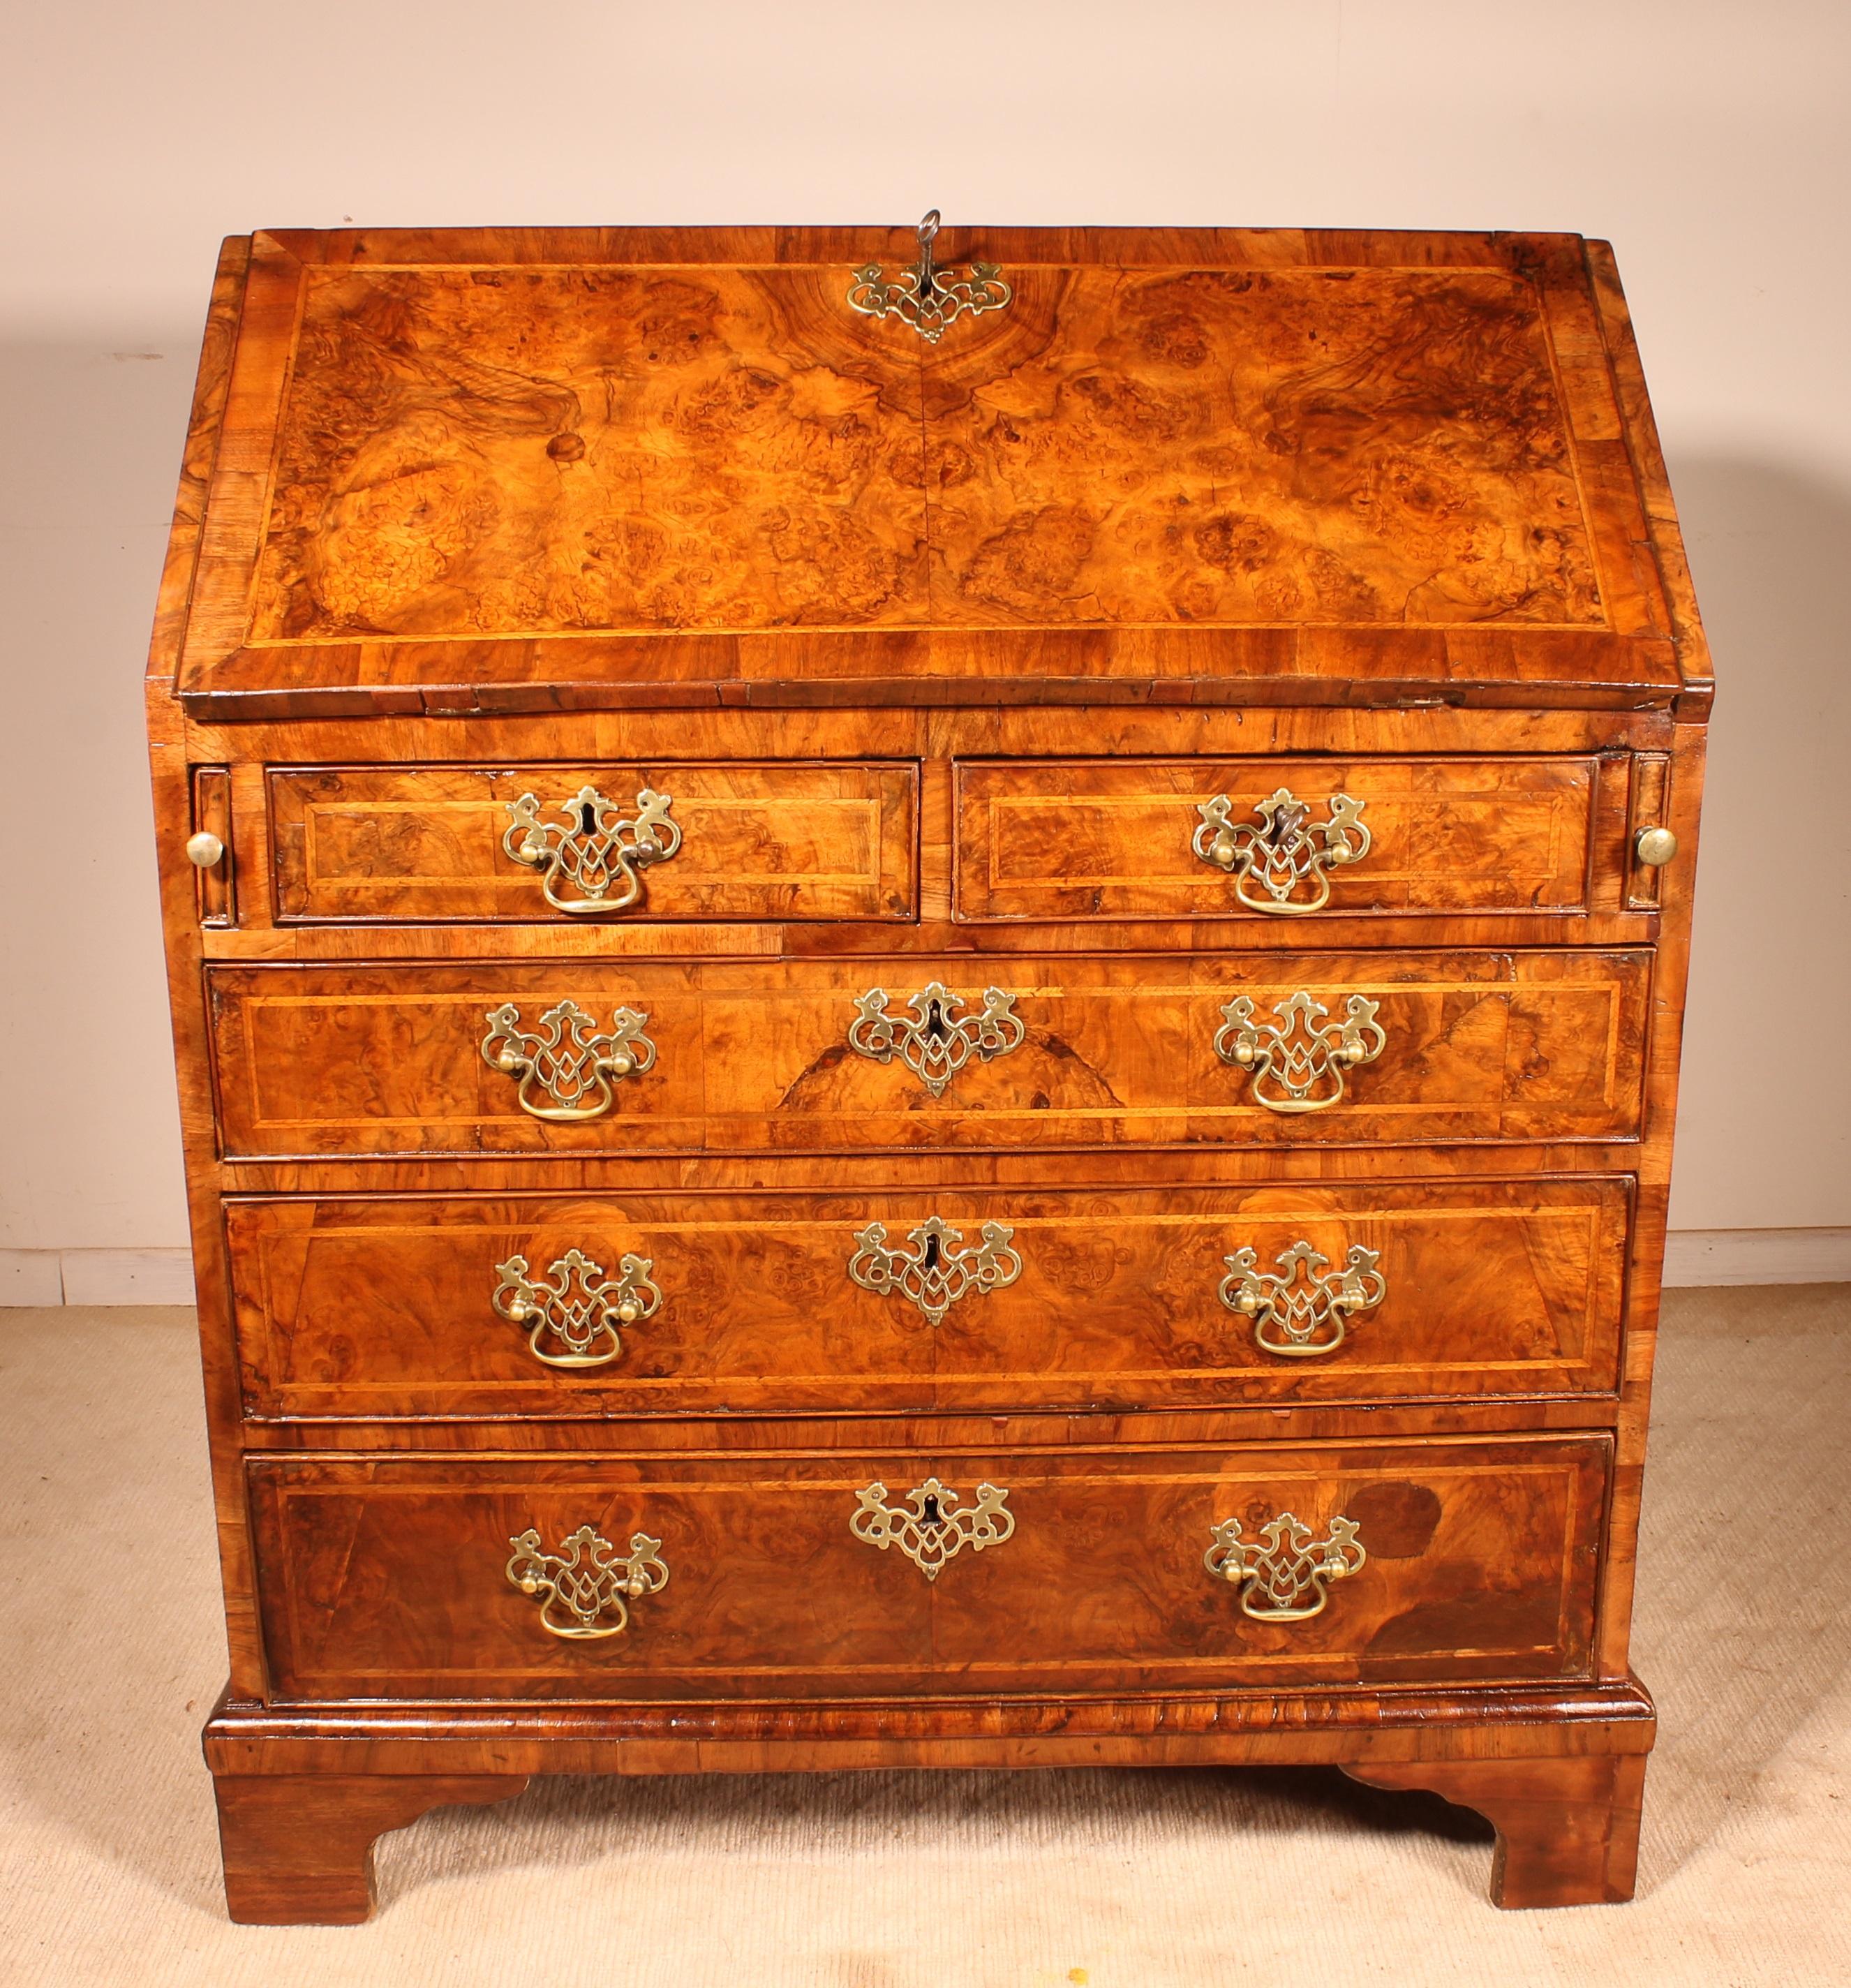 Exceptional Secretary in walnut and blurr walnut from the early 18th century Queen Anne period (1702-1714).
This beautiful secretary stands out by it's beautiful interior and exceptional quality.

Indeed, the front of the desk is entirely in